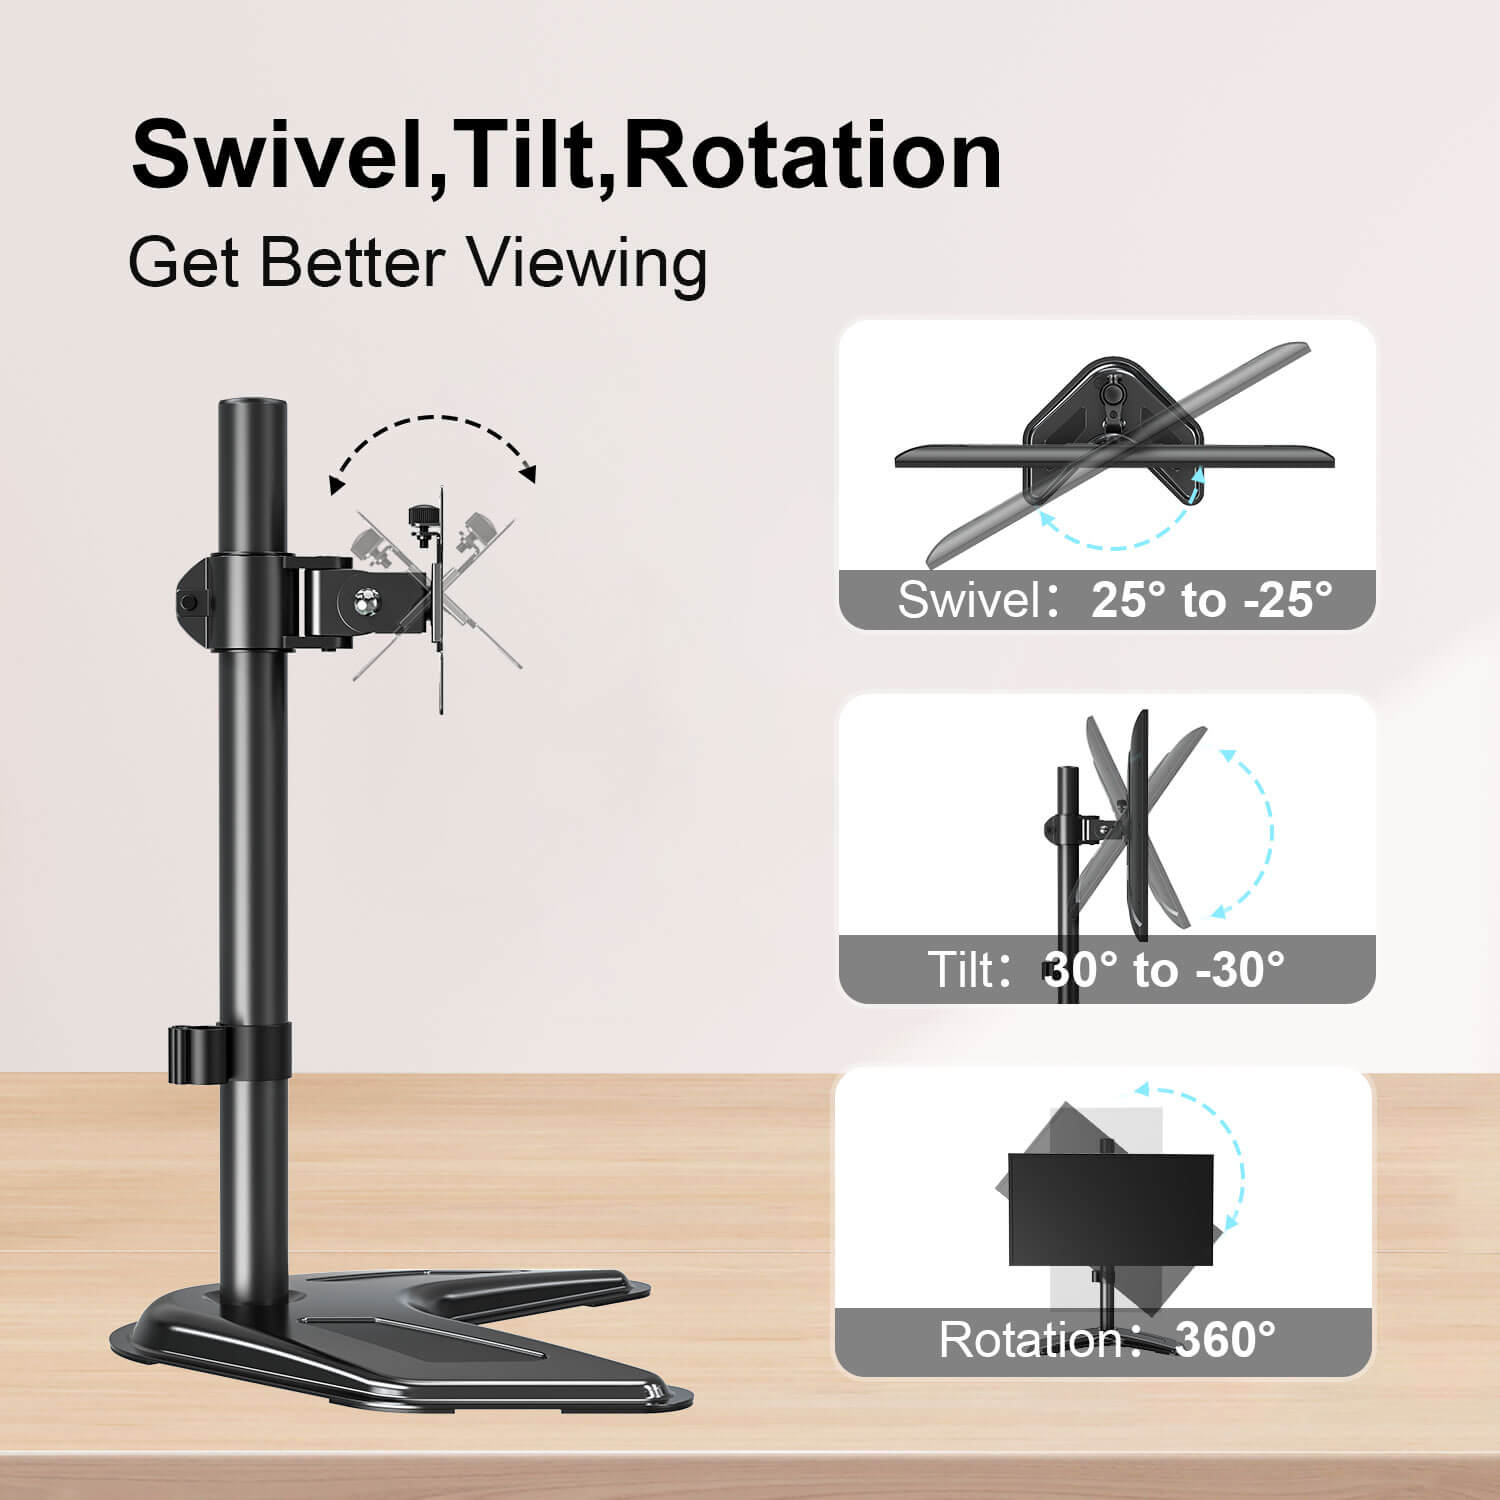 full motion monitor stand with swivel, tilt rotation for better viewing